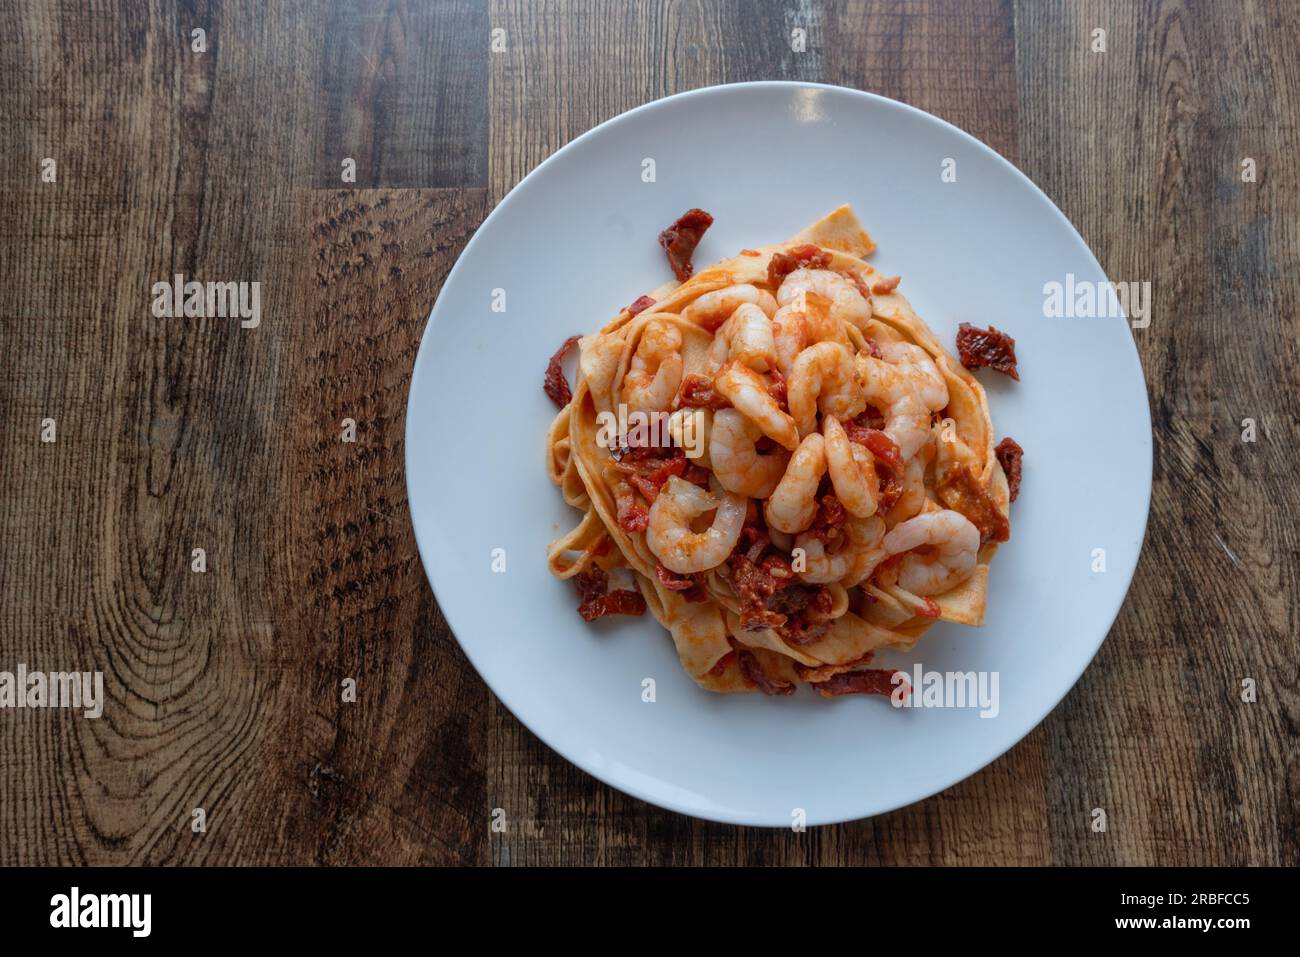 Tagliatelle pasta with sundry tomato and shrimp.Top view on a wooden table. Stock Photo